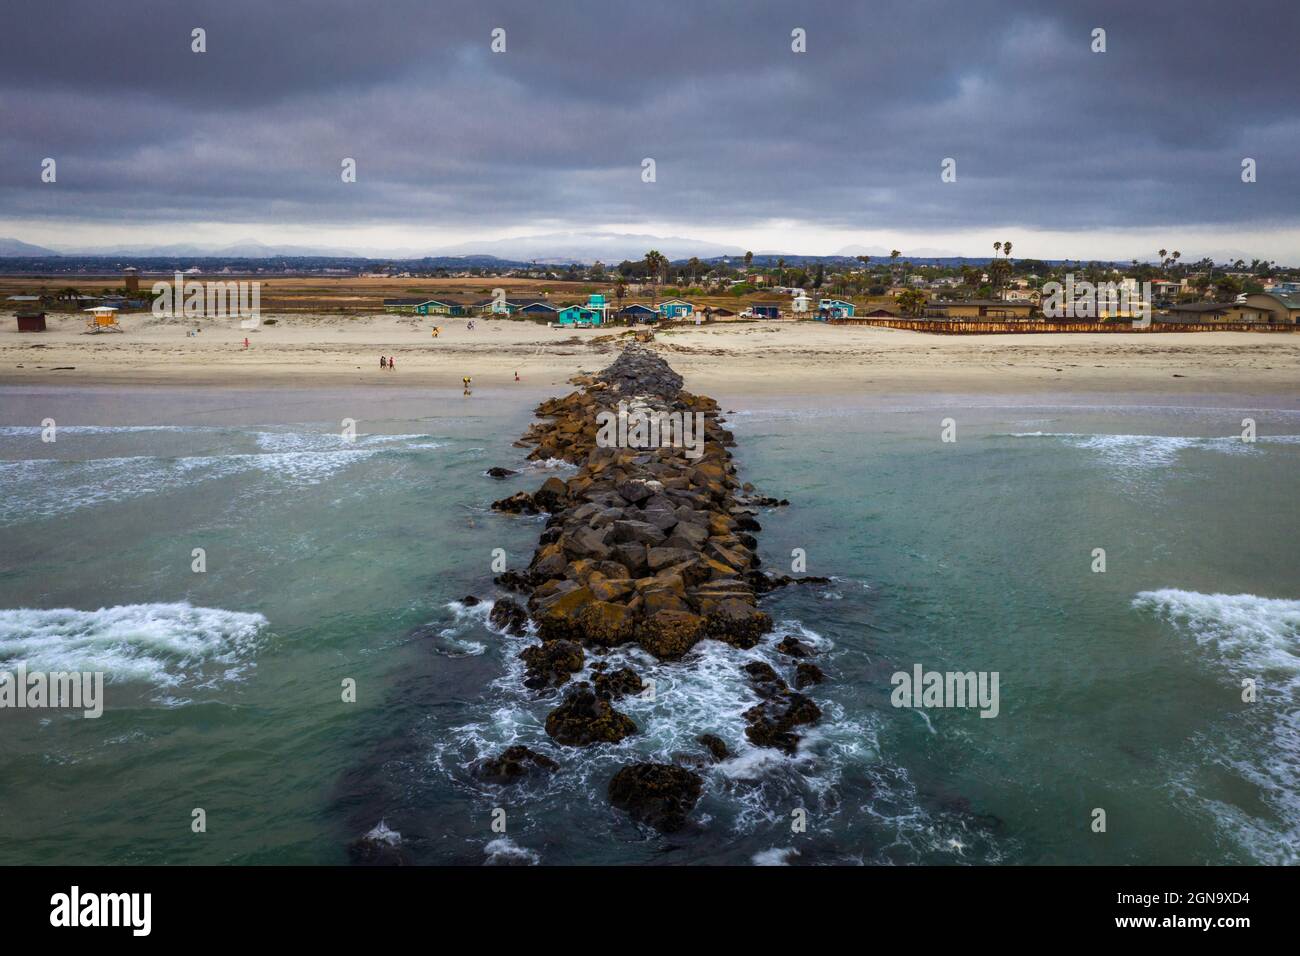 Waves breaking on rock jetty in Southern California Stock Photo